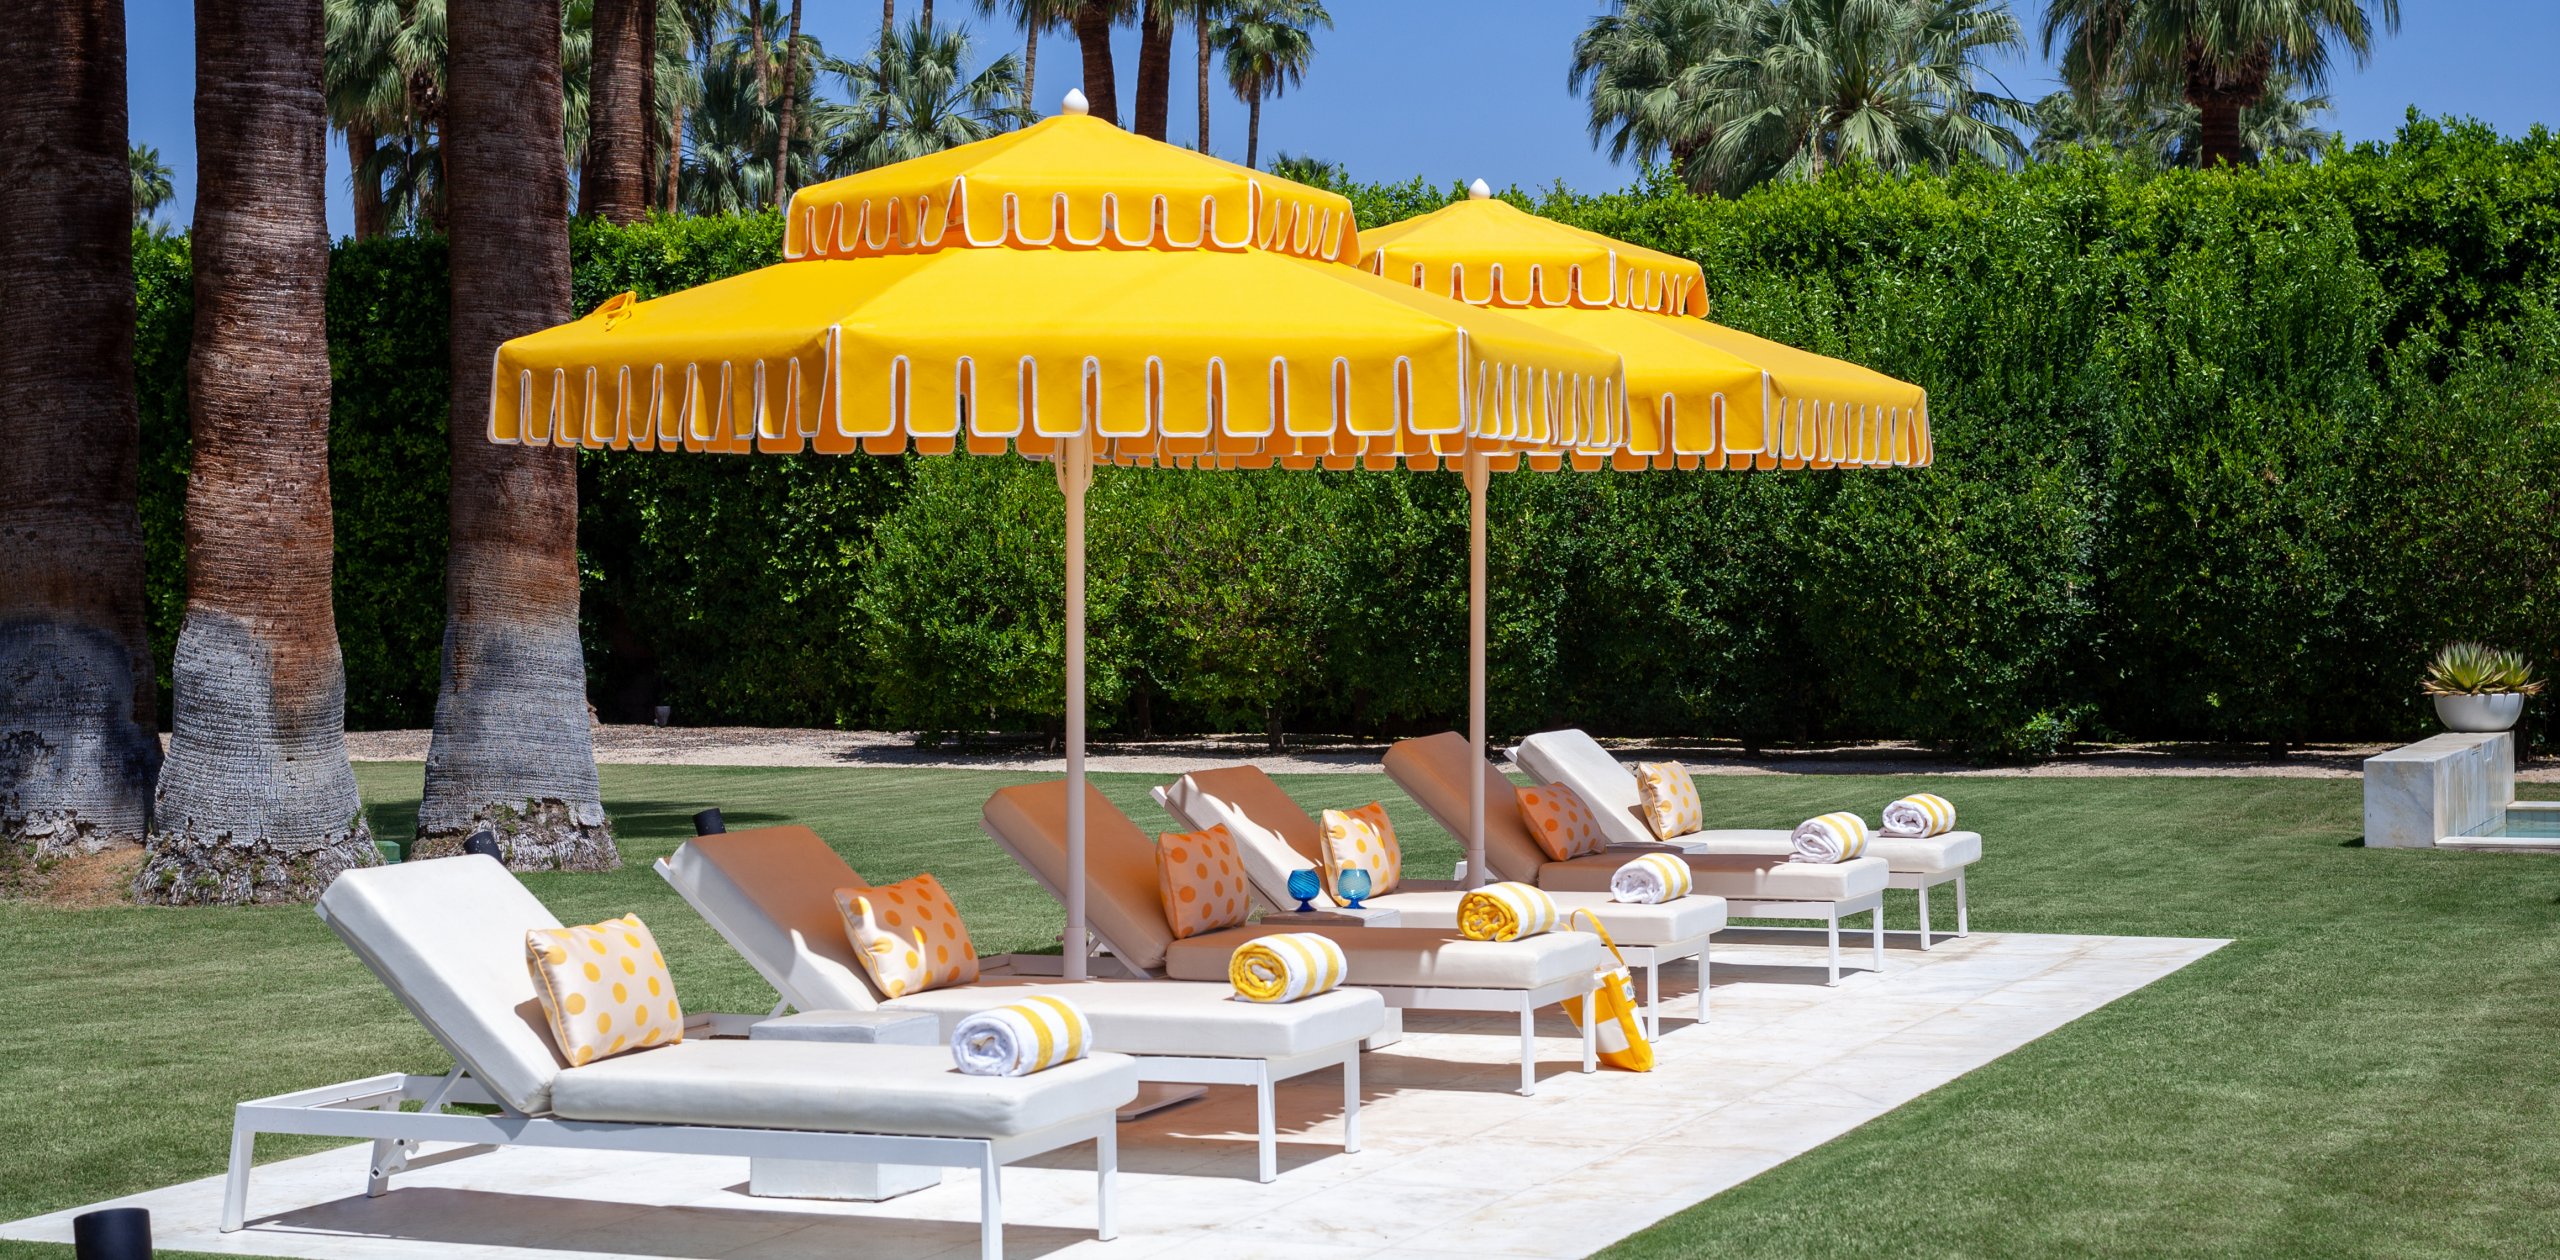 Image of umbrellas and chaises poolside